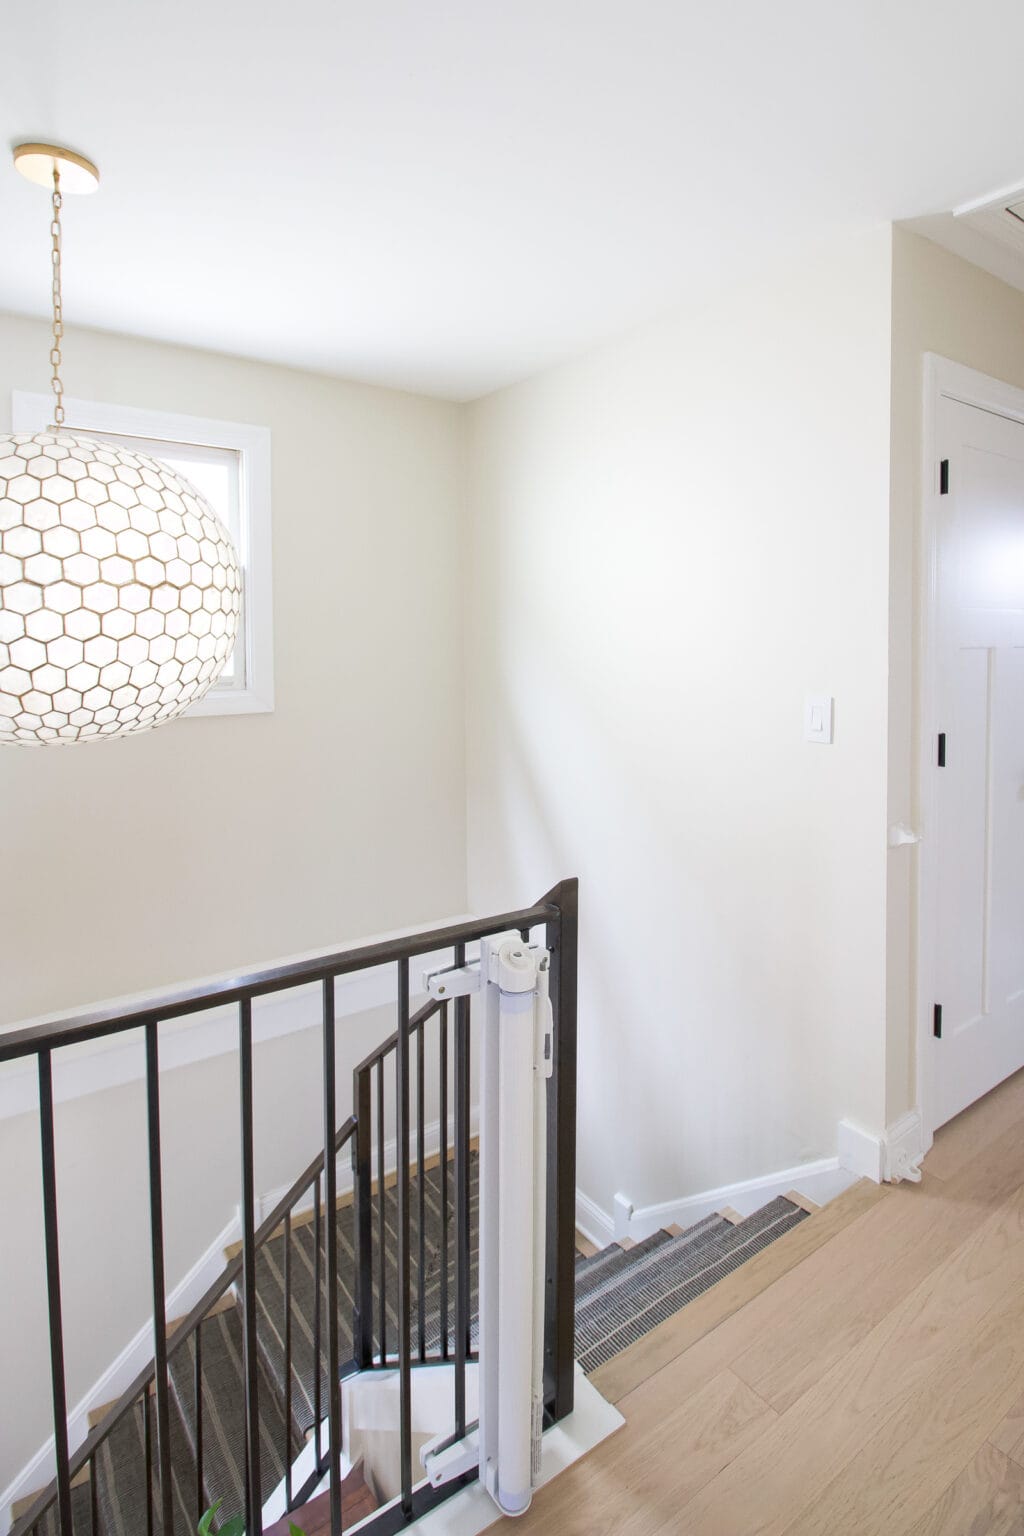 Making a stairwell accent wall design plan